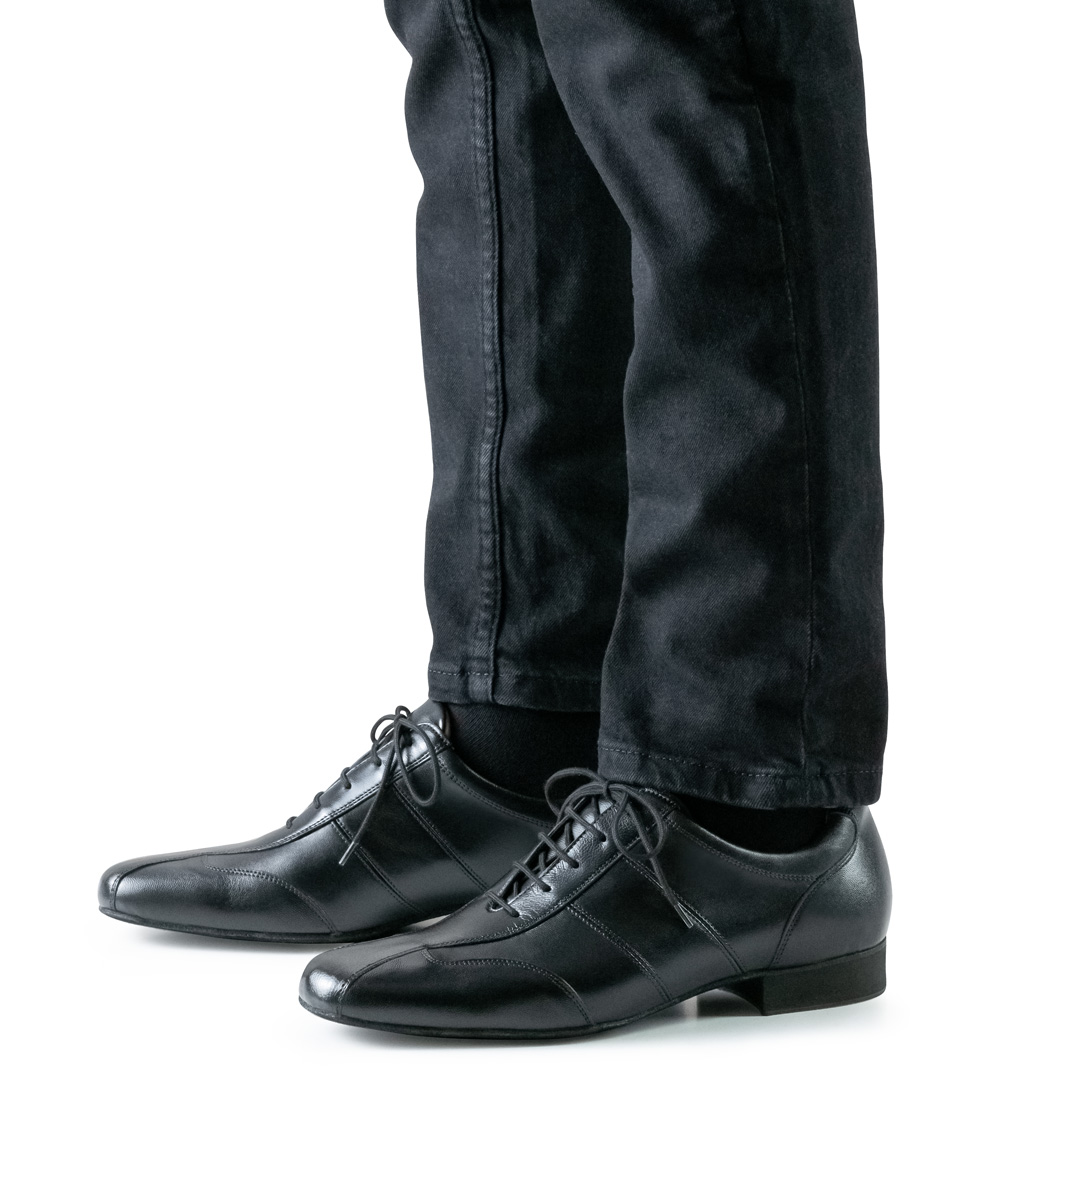 Sporty men's dance shoe by Werner Kern in black in combination with black trousers